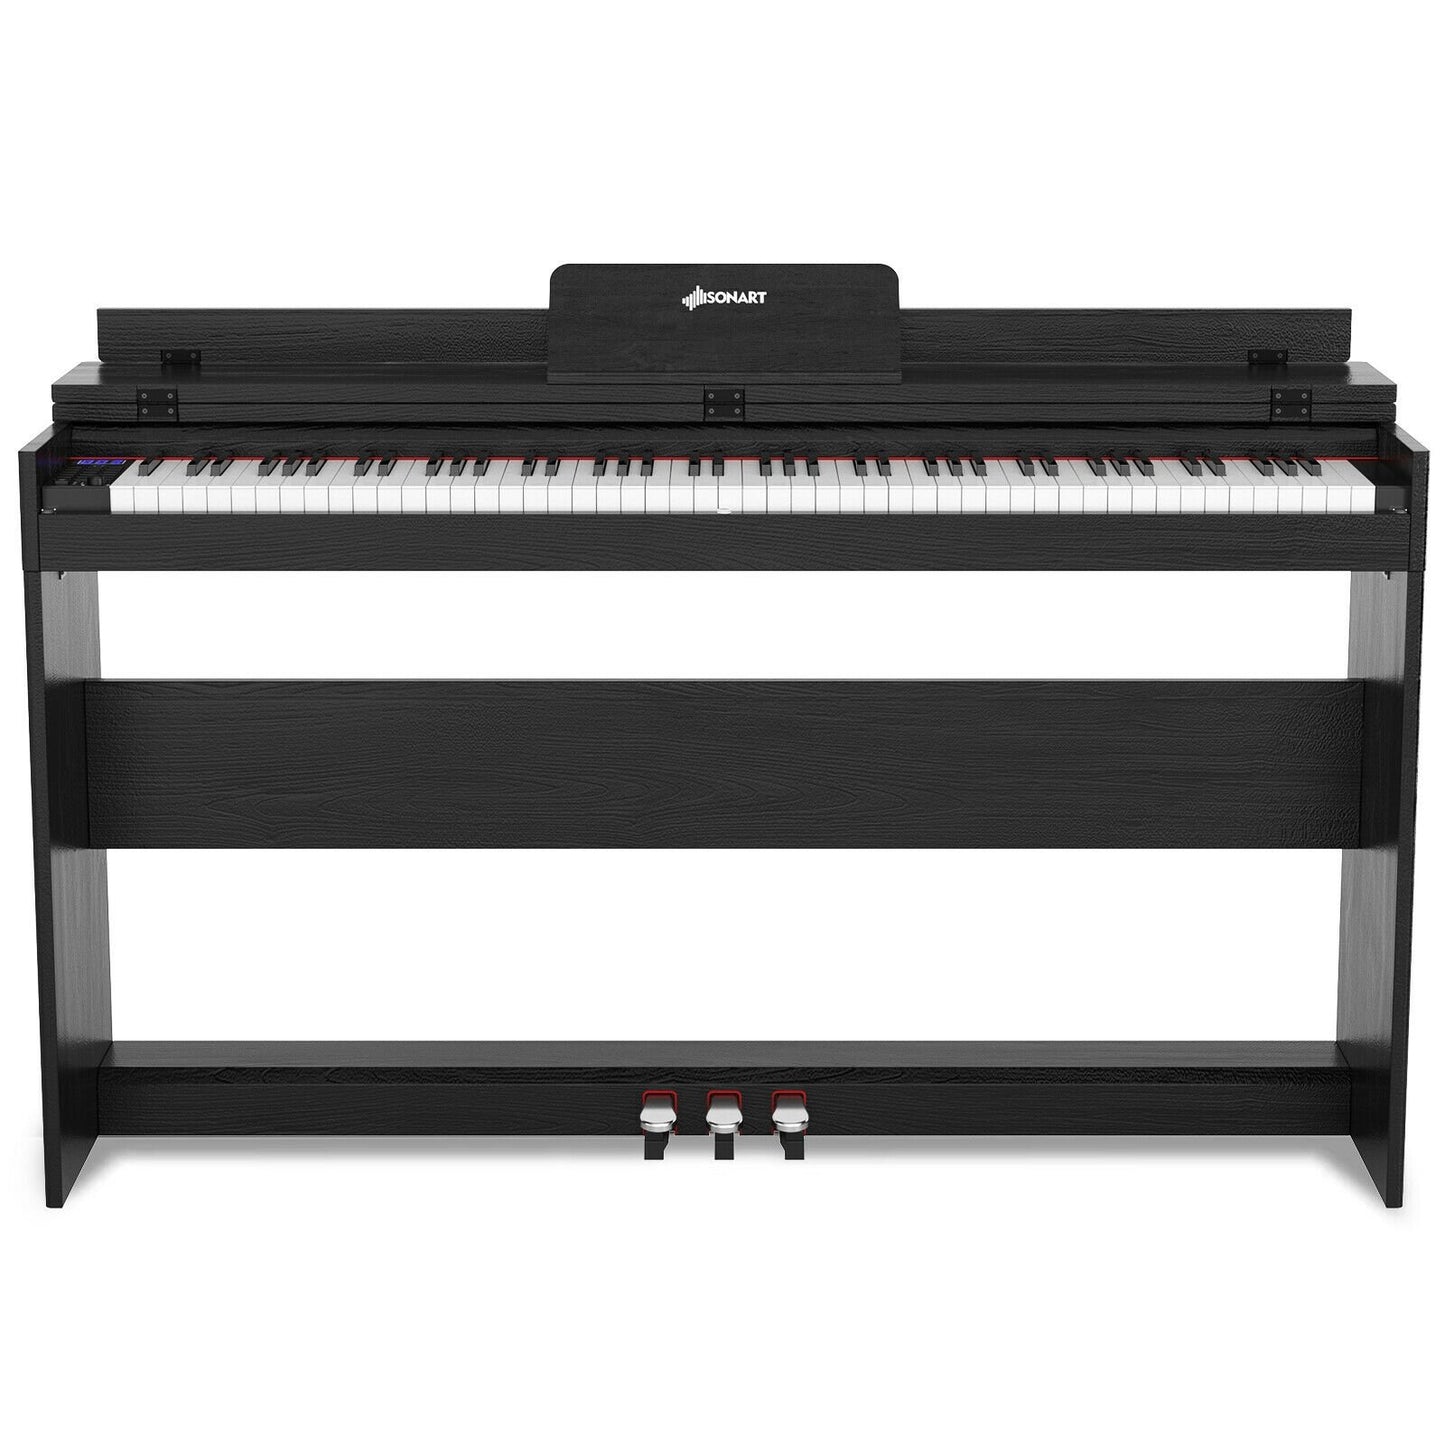 88 Key Full Size Electric Piano Keyboard with Stand 3 Pedals MIDI Function, Black